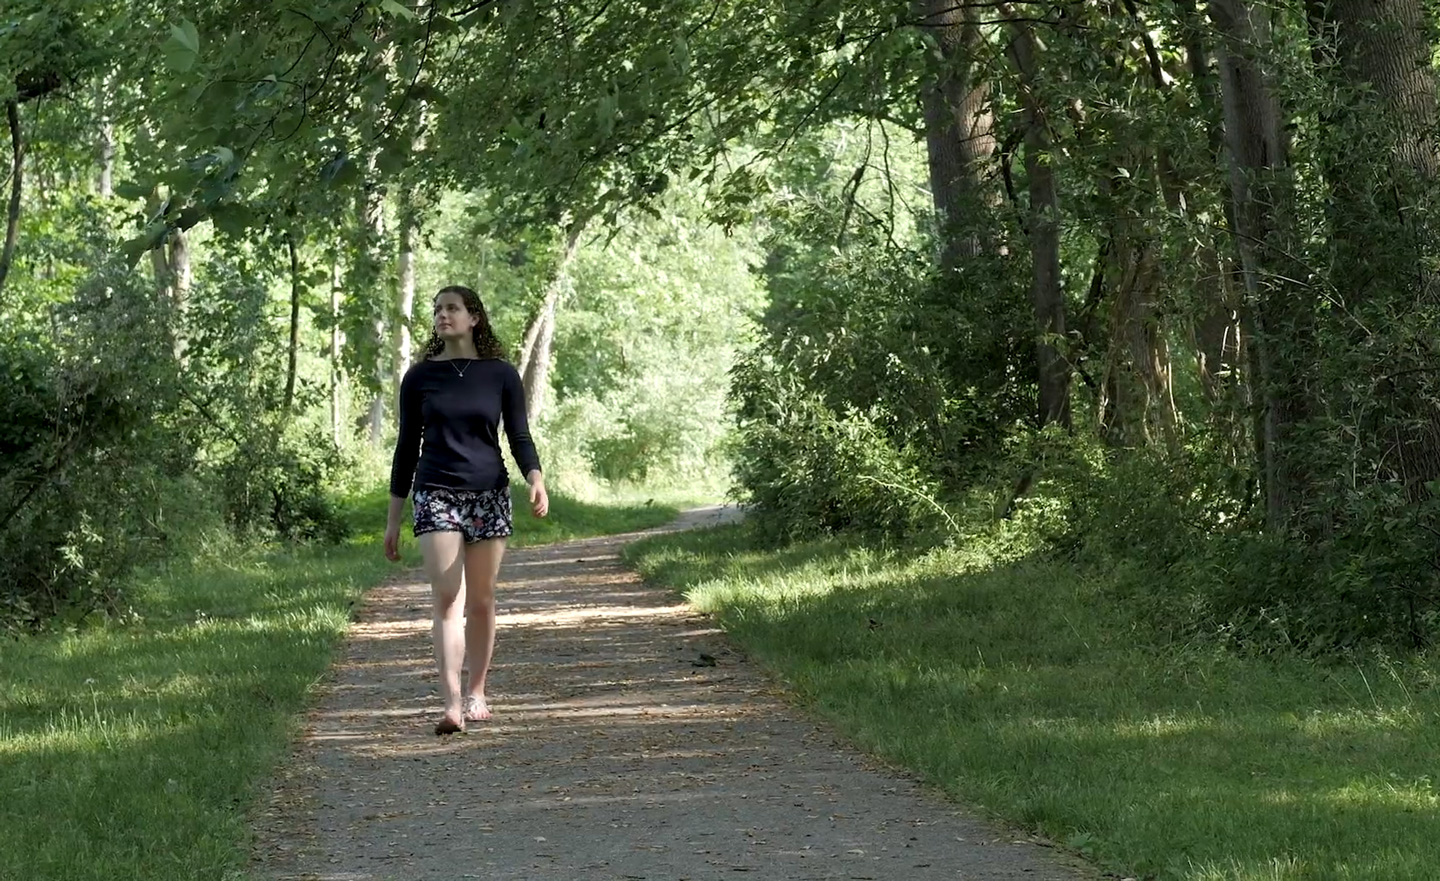 Liza walking down a path in a wooded area.